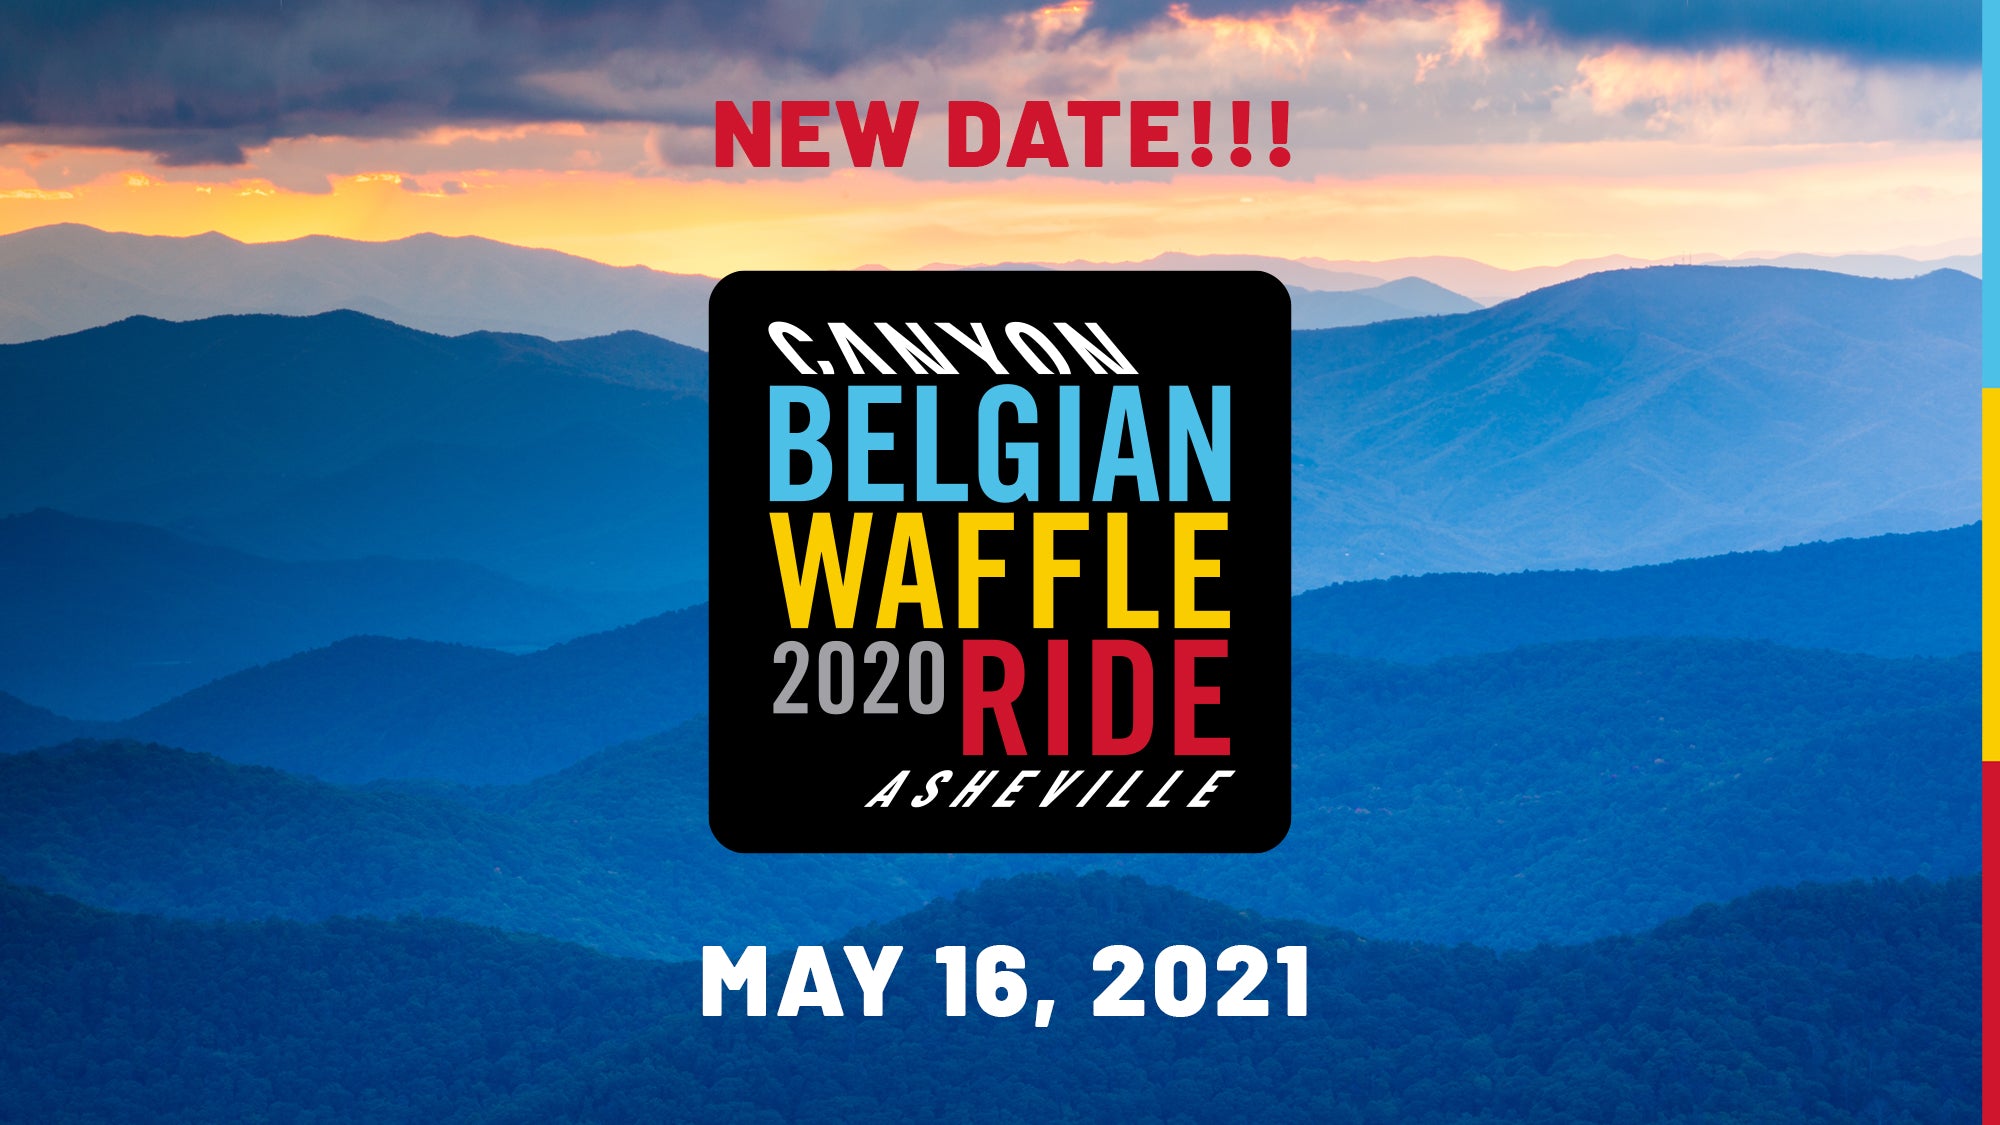 BWR new date: may 16, 2021